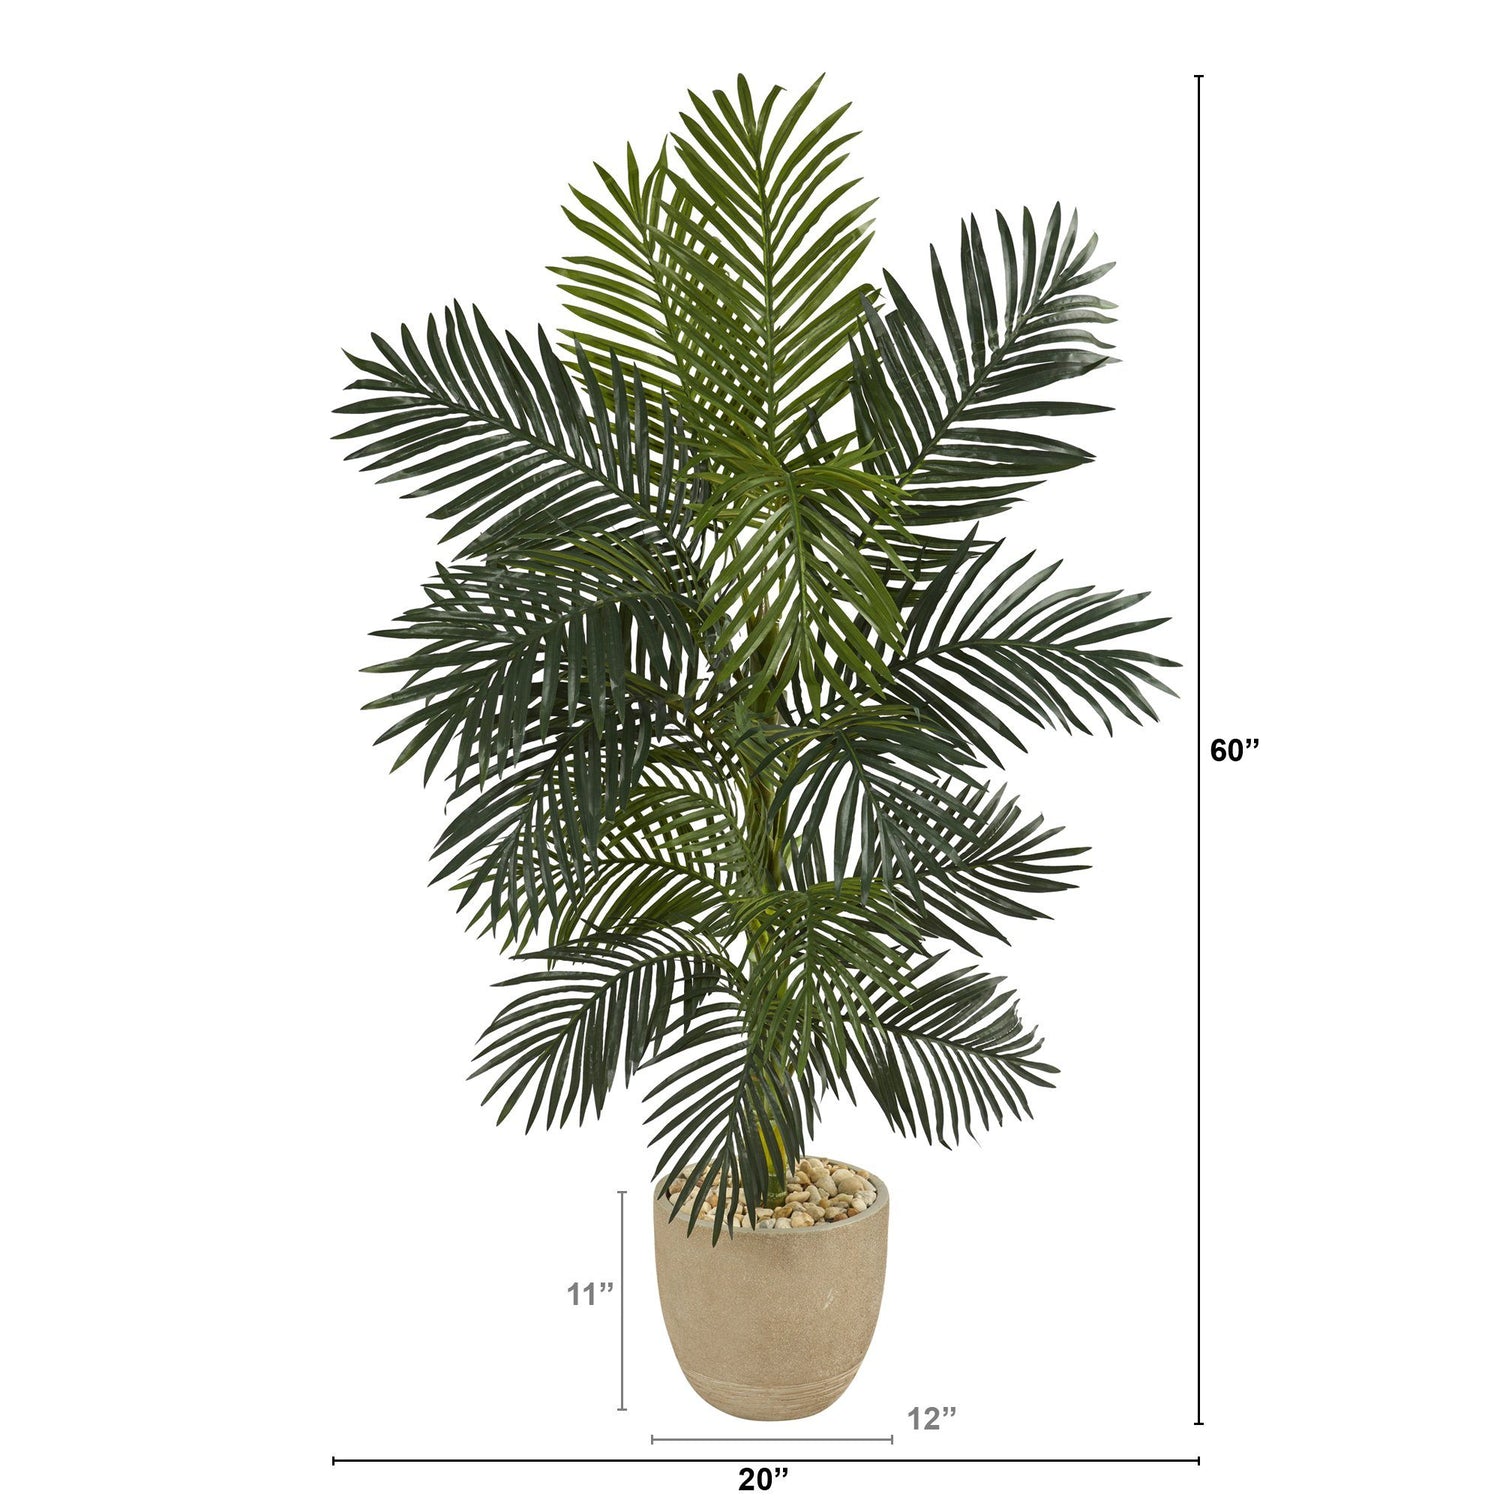 5’ Golden Cane Artificial Palm Tree in Sandstone Planter